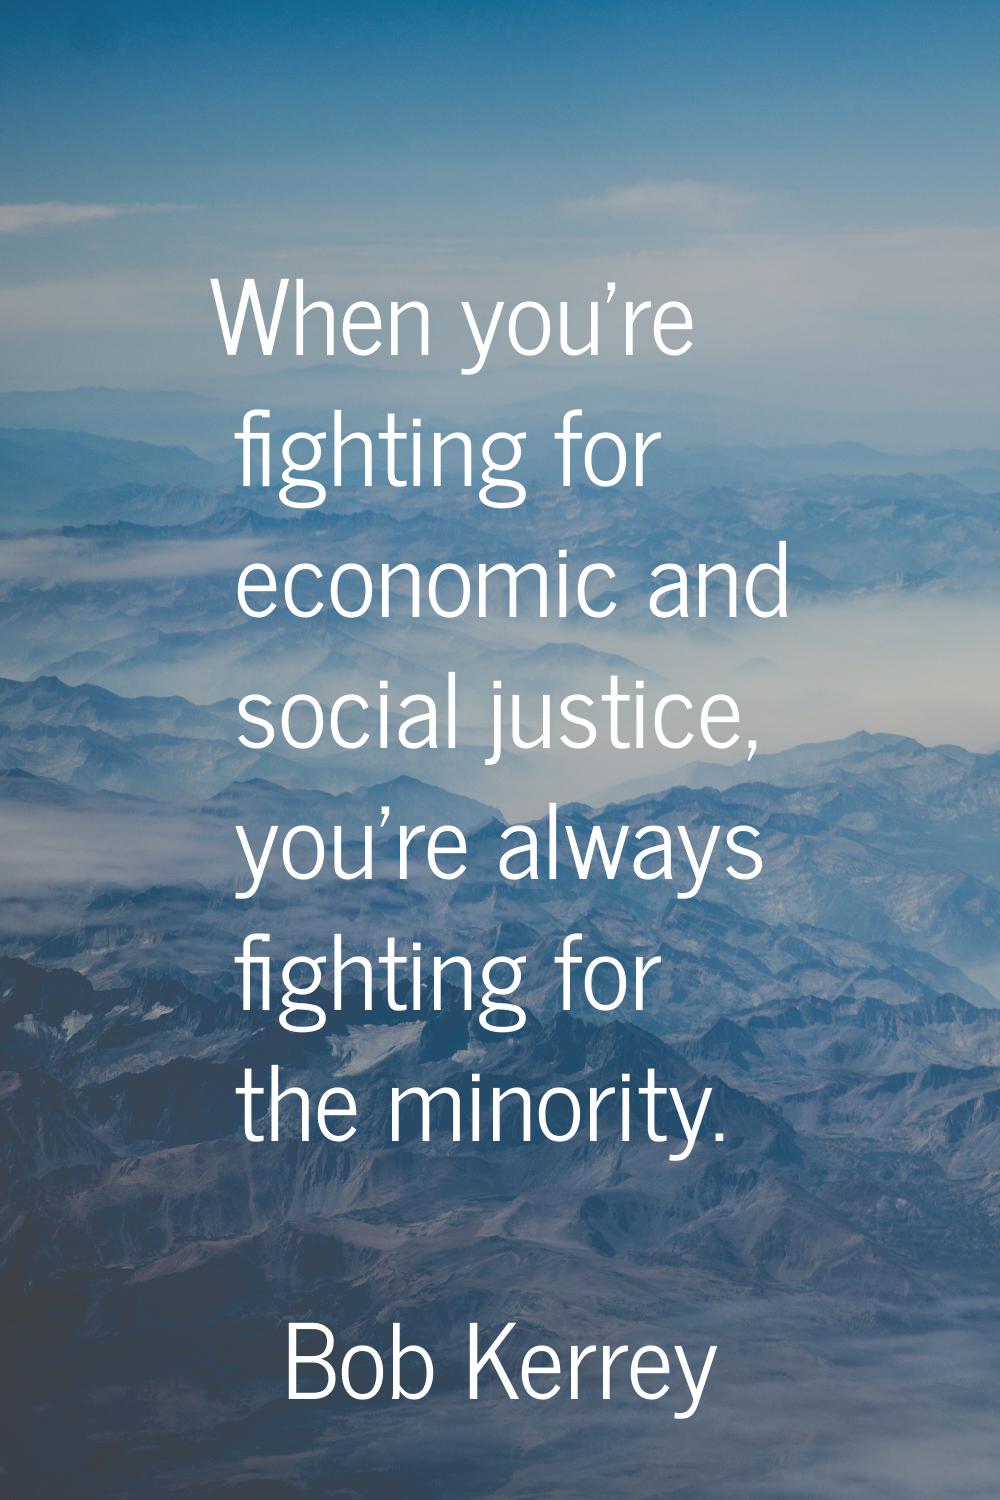 When you're fighting for economic and social justice, you're always fighting for the minority.